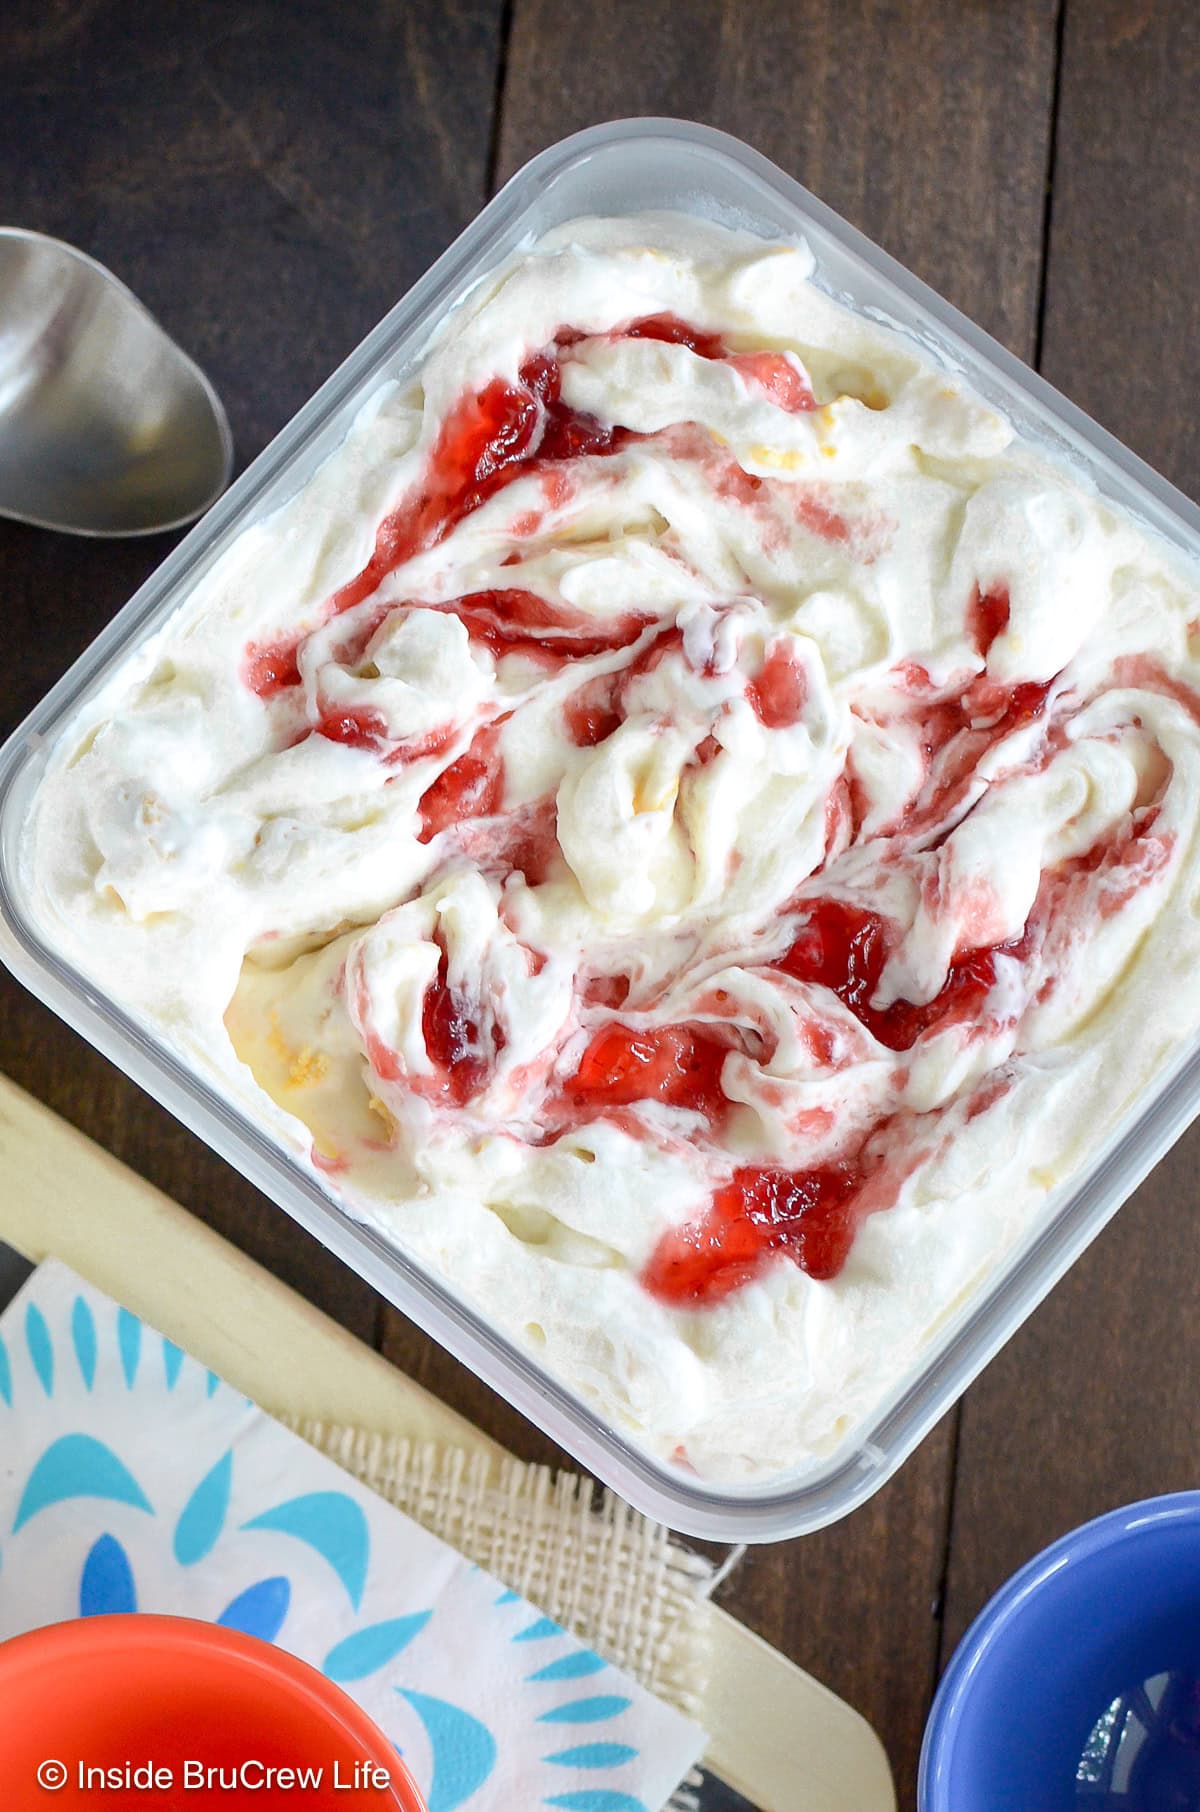 A container of frozen no churn lemon ice cream with strawberry swirls.